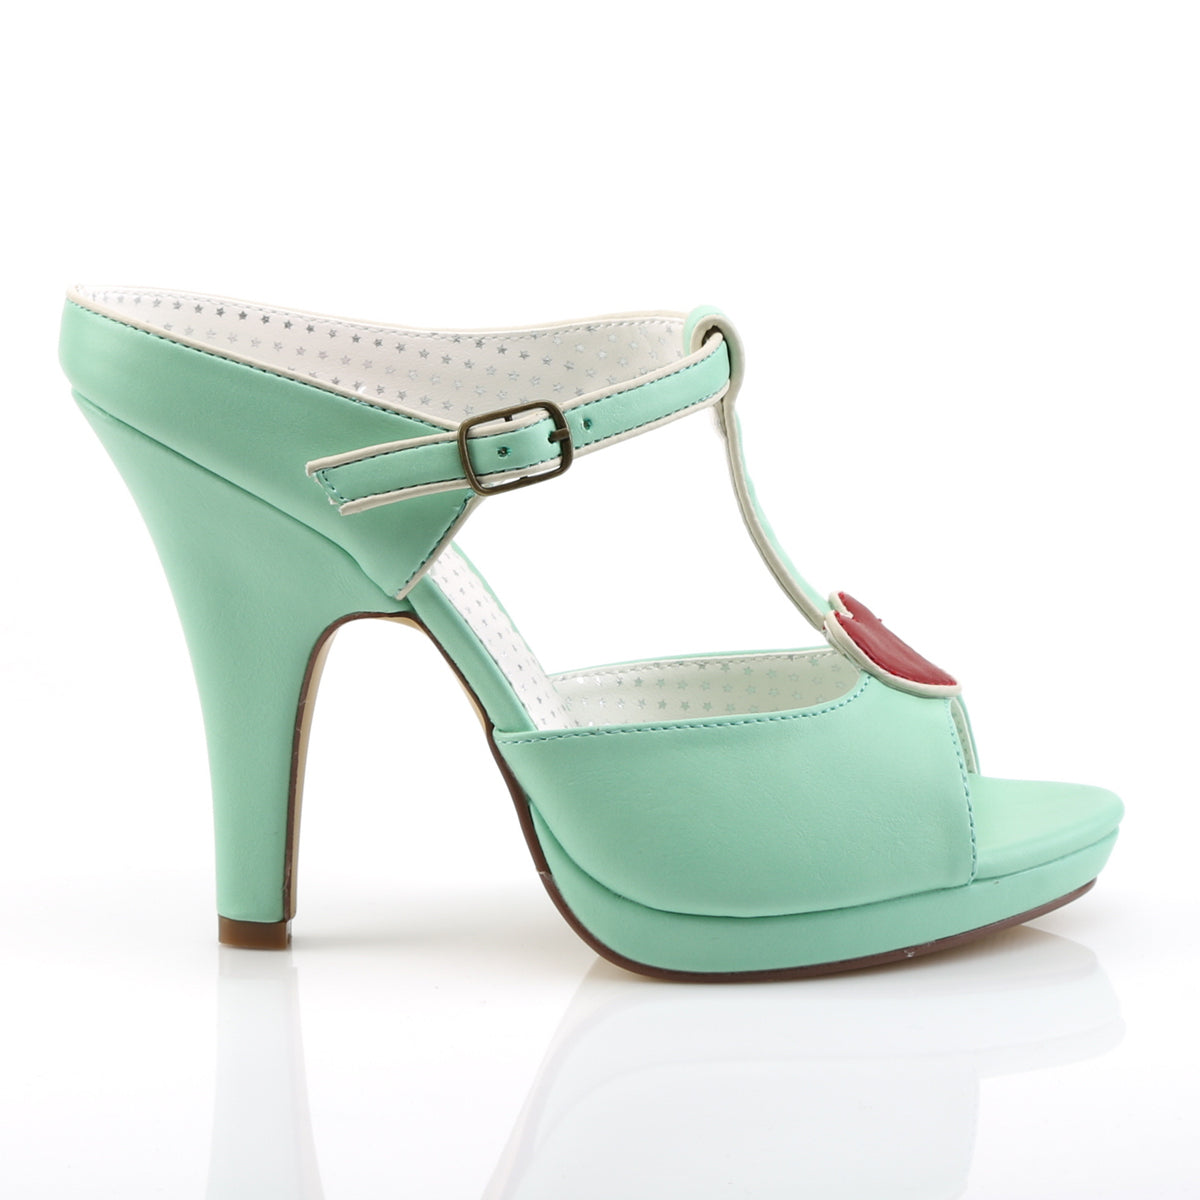 SIREN-09 Retro Glamour Pin Up Couture Platforms Mint Faux Leather